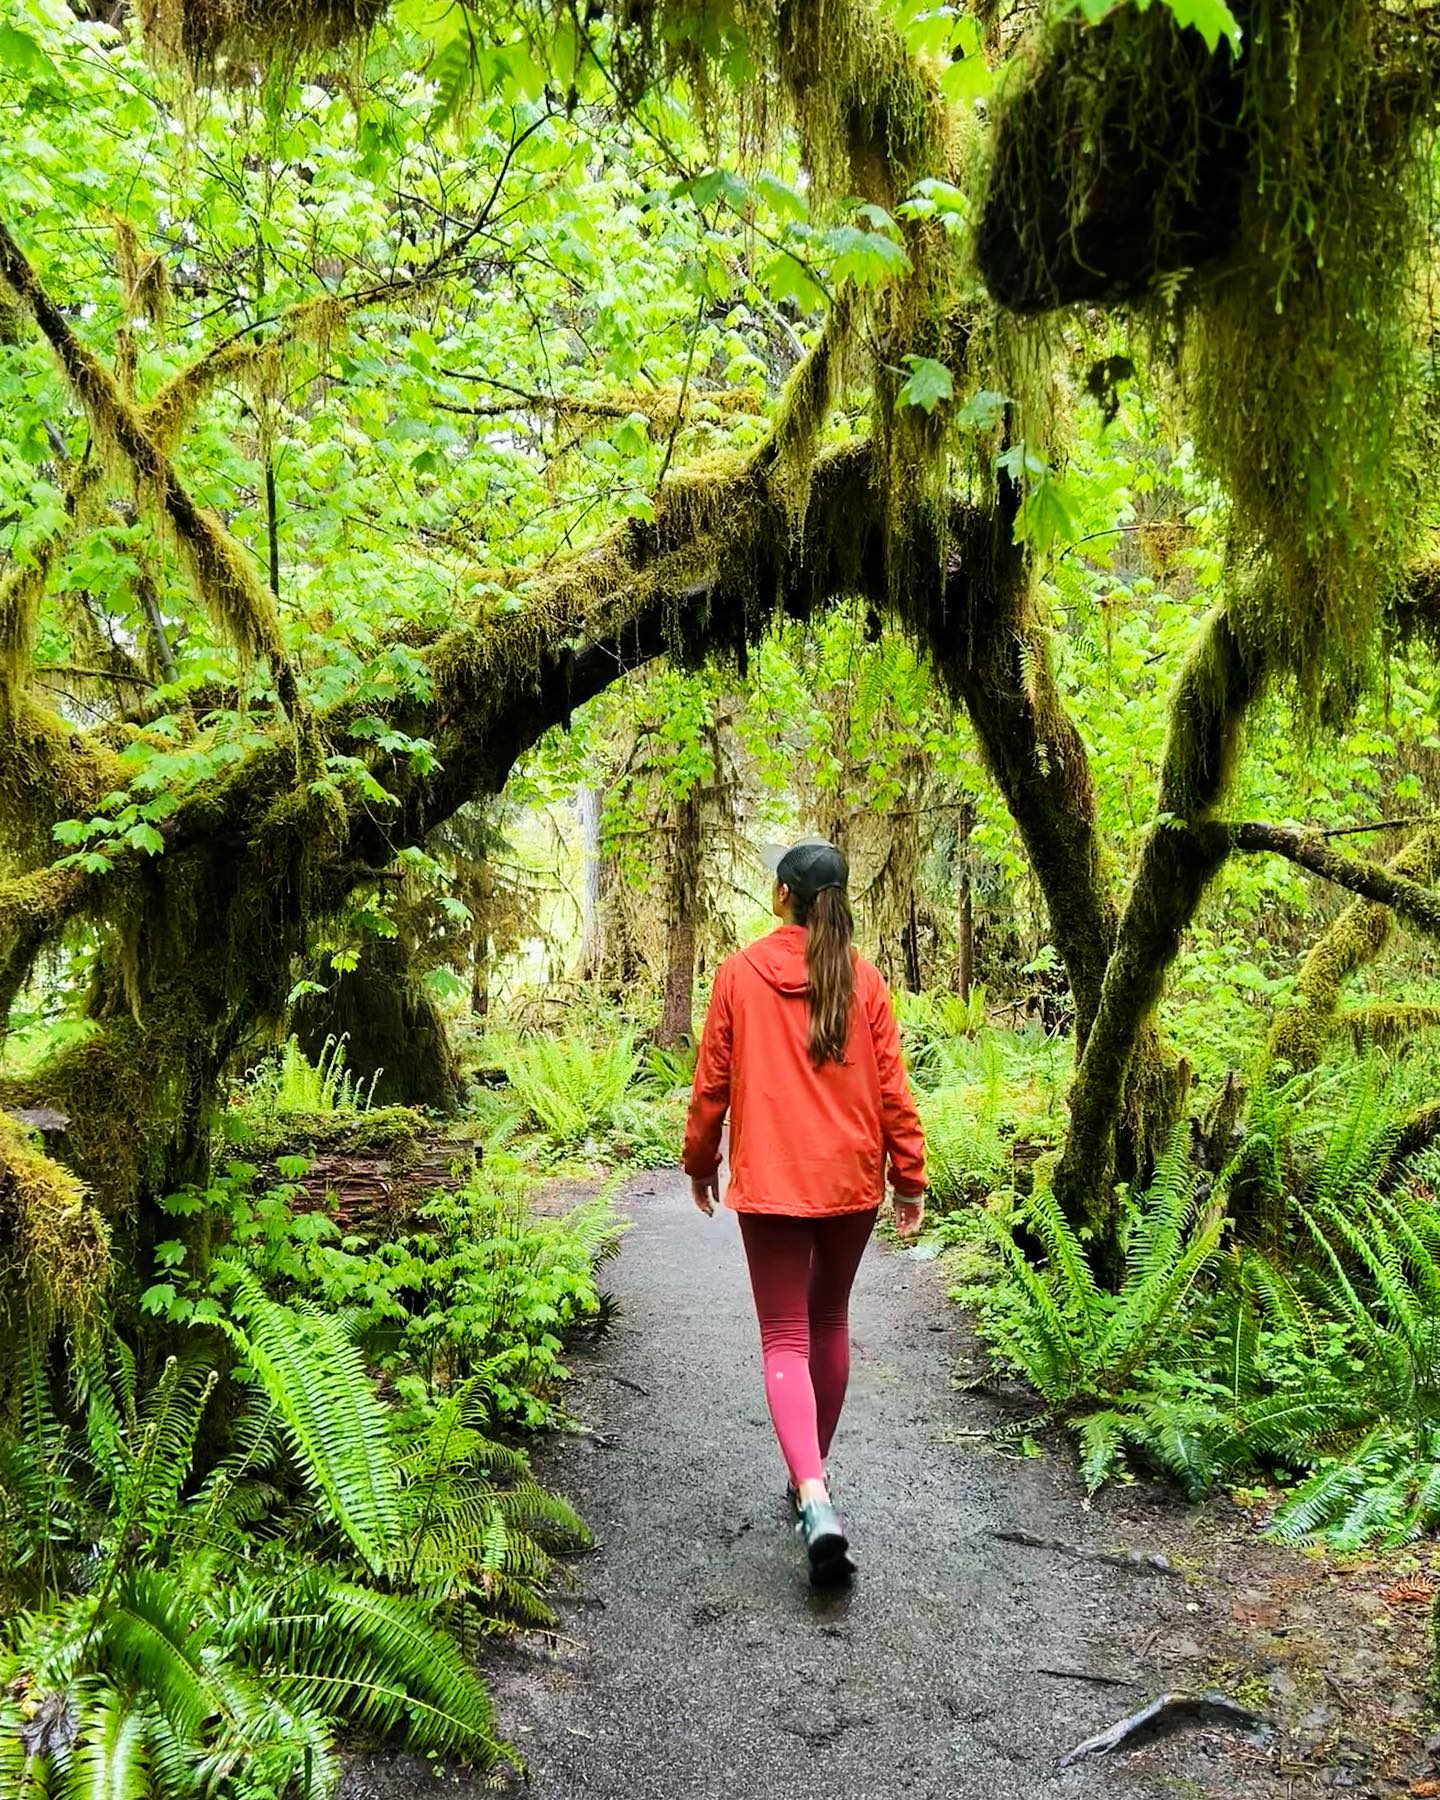 We had A LOT of rain during our road trip. But one place where that didn’t really matter, was the magical Hoh Rain Forest 🌿
.
.
#olympicnationalpark #washingtonstate #hohrainforest #rainforest #moss #nature #forest #naturelover #lushgreen #wanderlust #hike #walk #nationalpark #usa #naturephotography #travel #roadtrip #camping #camper #camperlust #woods #washington #usanature #reizen #rondreis #pnw #reisfotografie #natuur #reisbloggers #reistypje